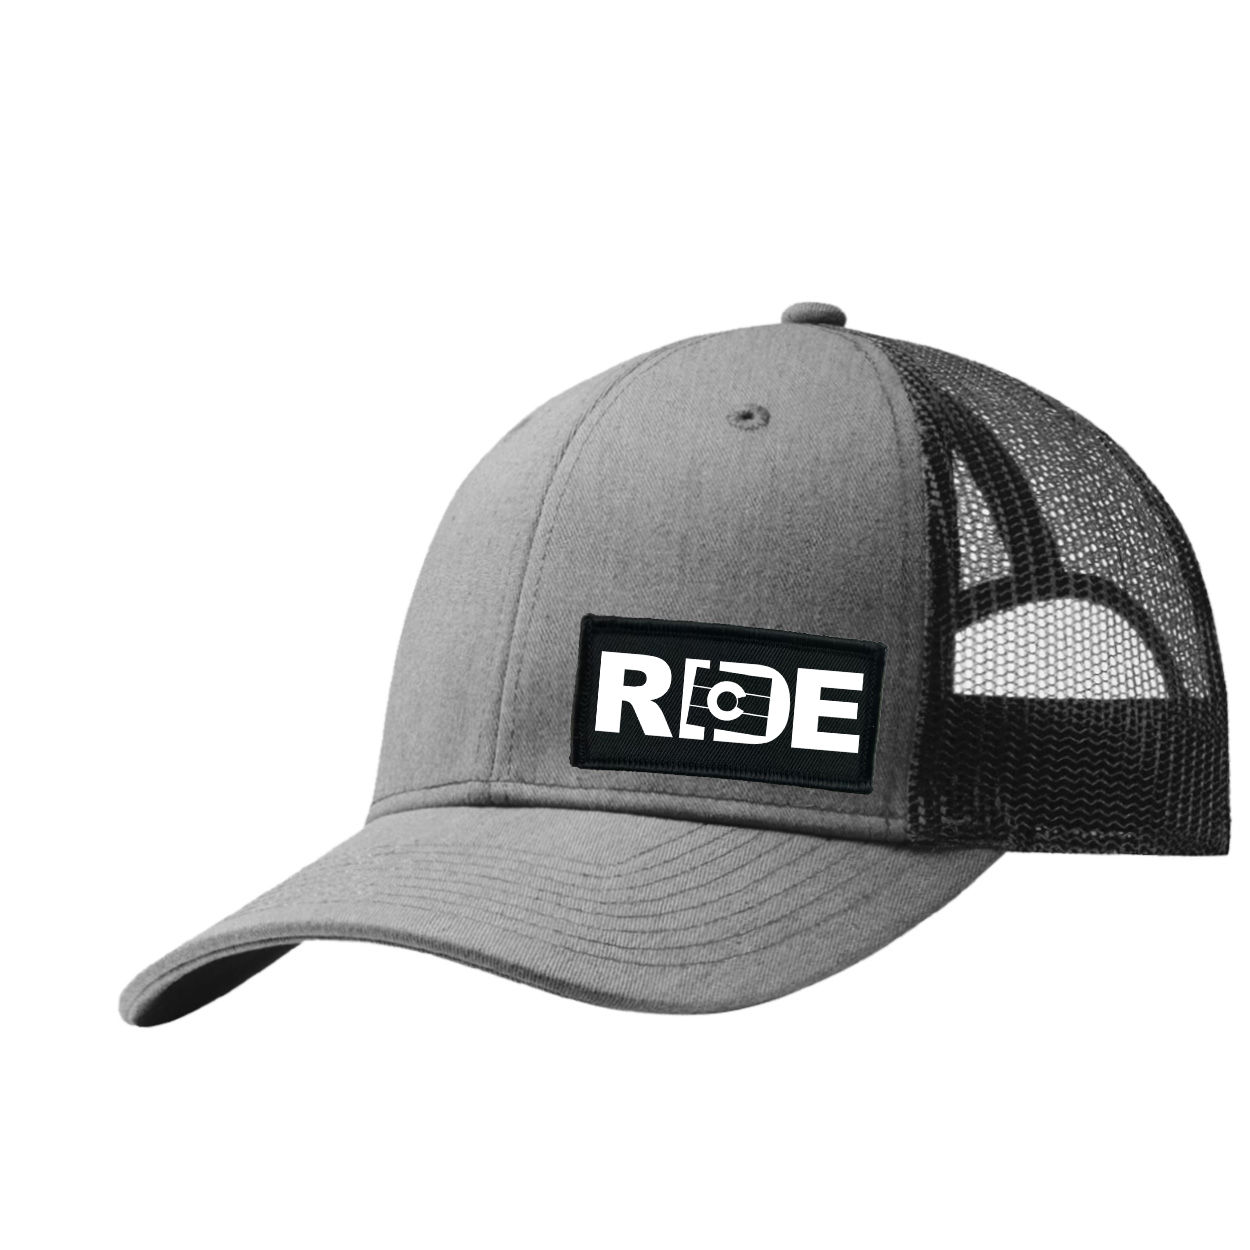 Ride Colorado Night Out Woven Patch Snapback Trucker Hat Heather Gray/Black (White Logo)